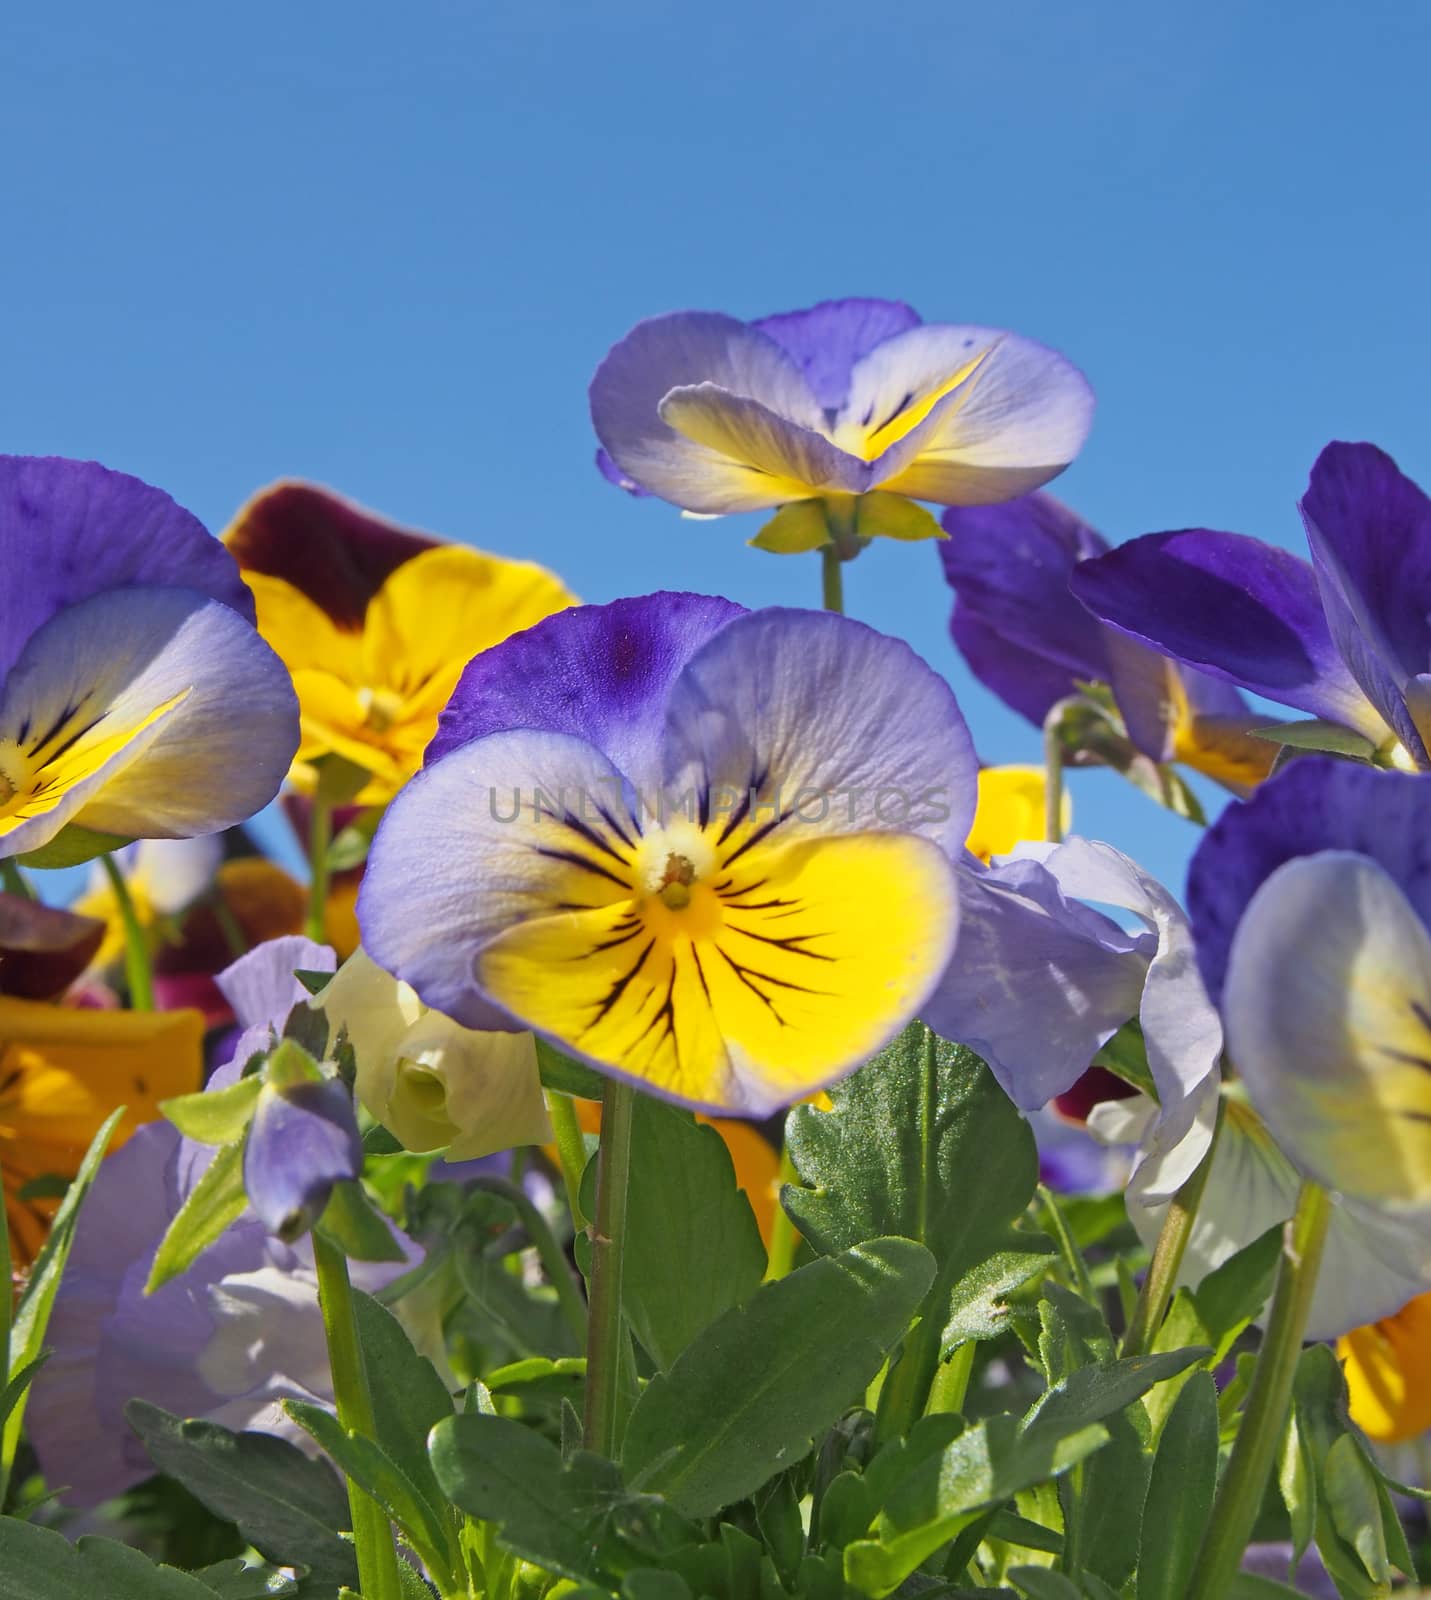 a close up of blue and yellow tricolor pansies in bright sunlight against a vibrant blue sky by philopenshaw